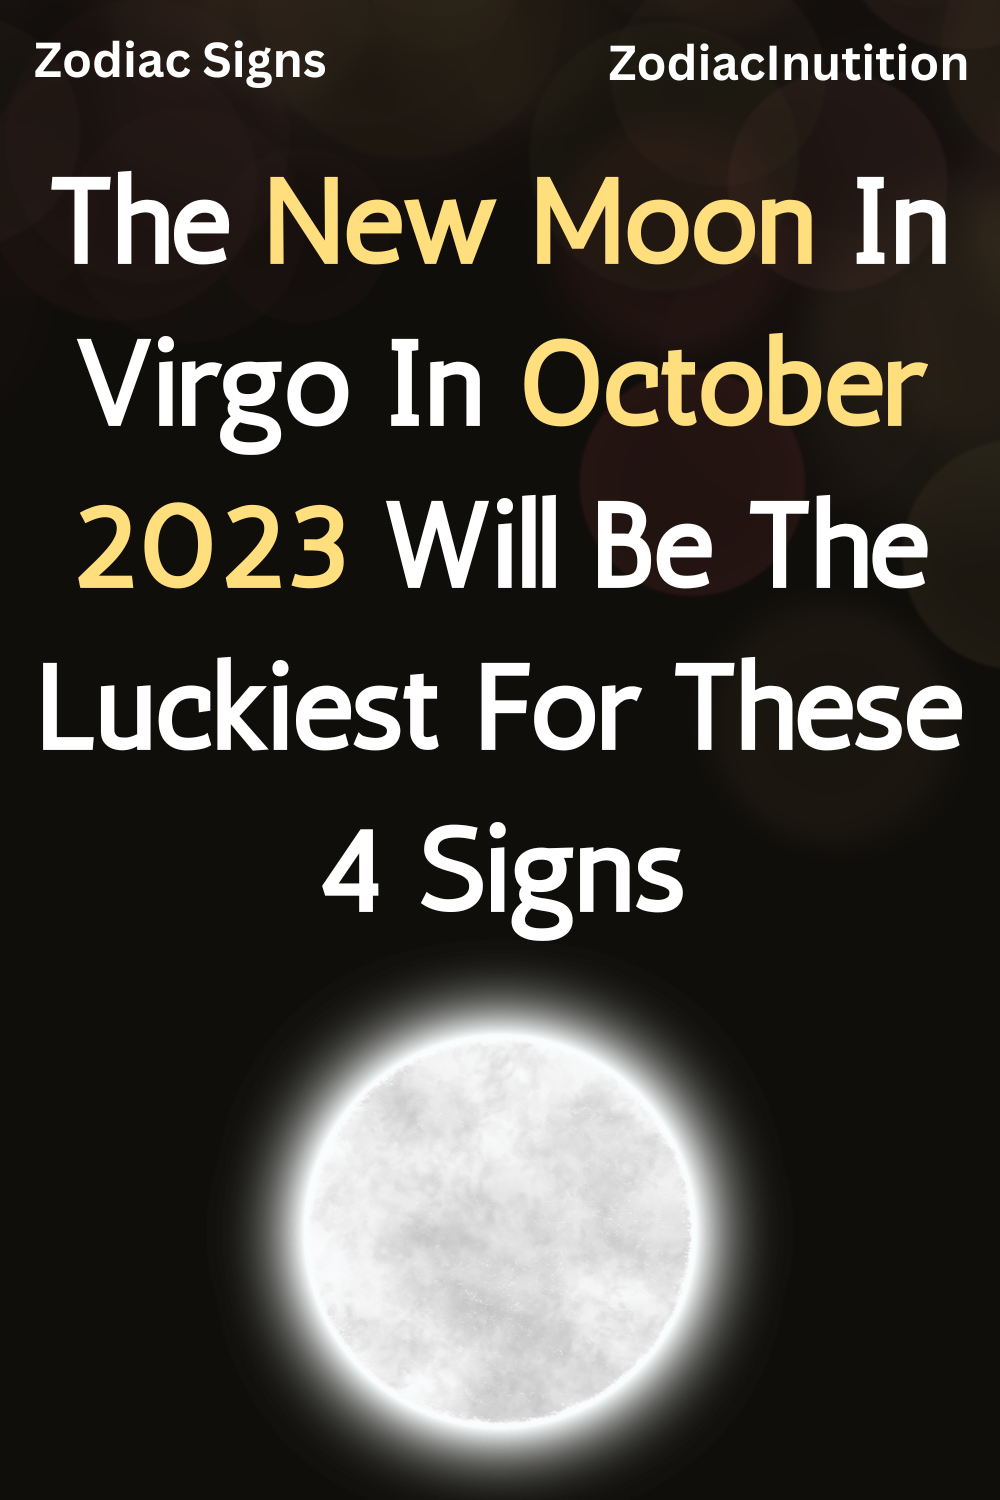 The New Moon In Virgo In October 2023 Will Be The Luckiest For These 4 Signs